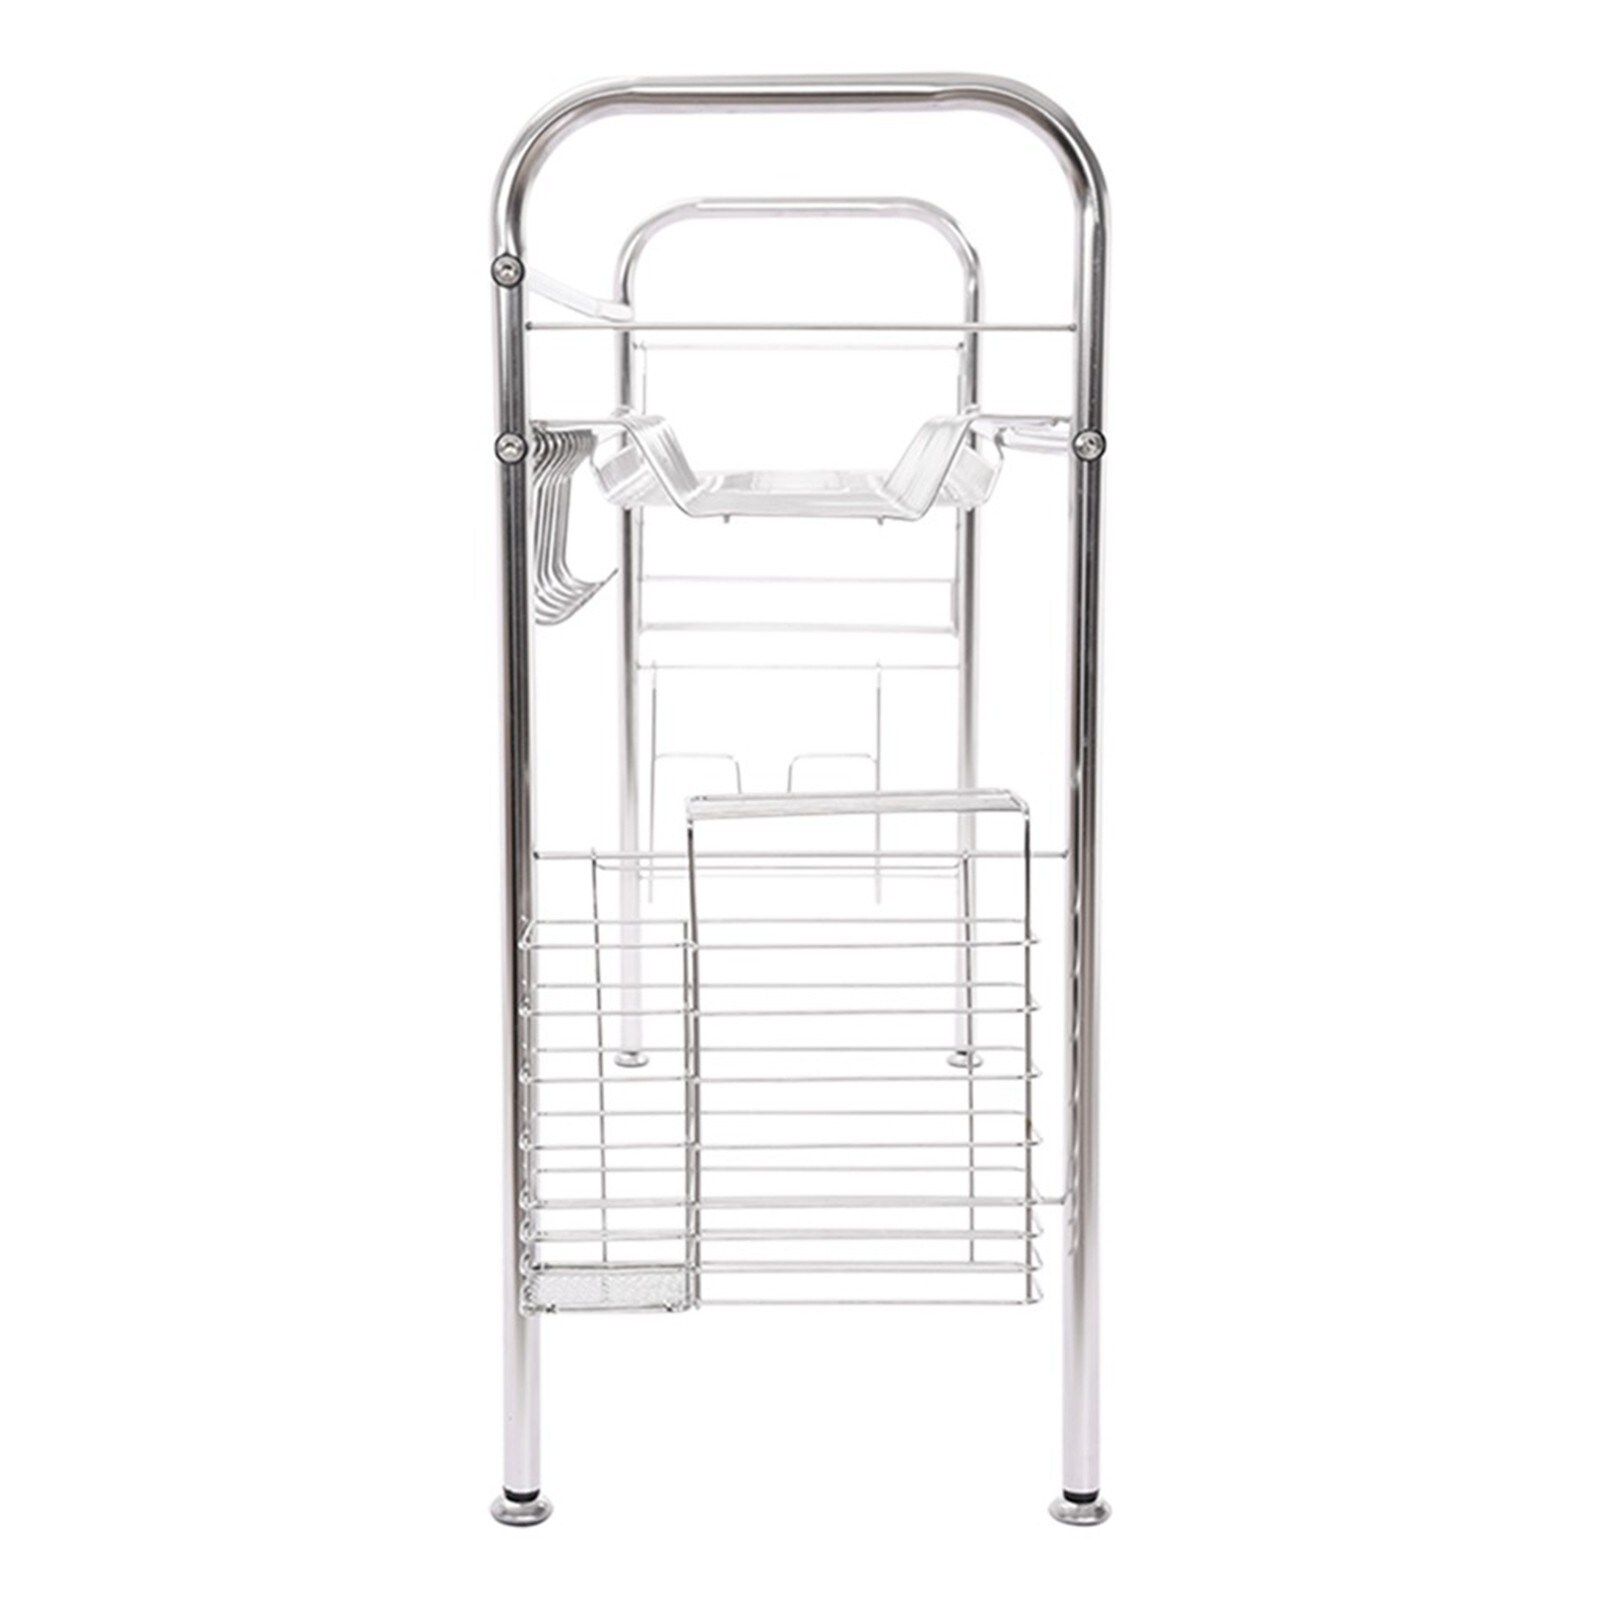 https://ak1.ostkcdn.com/images/products/is/images/direct/f43d126b7246ee55d9325d47096ddc32343c2599/Dish-Drying-Rack-Over-Sink-Display-Drainer-Kitchen-Utensils-Holder.jpg